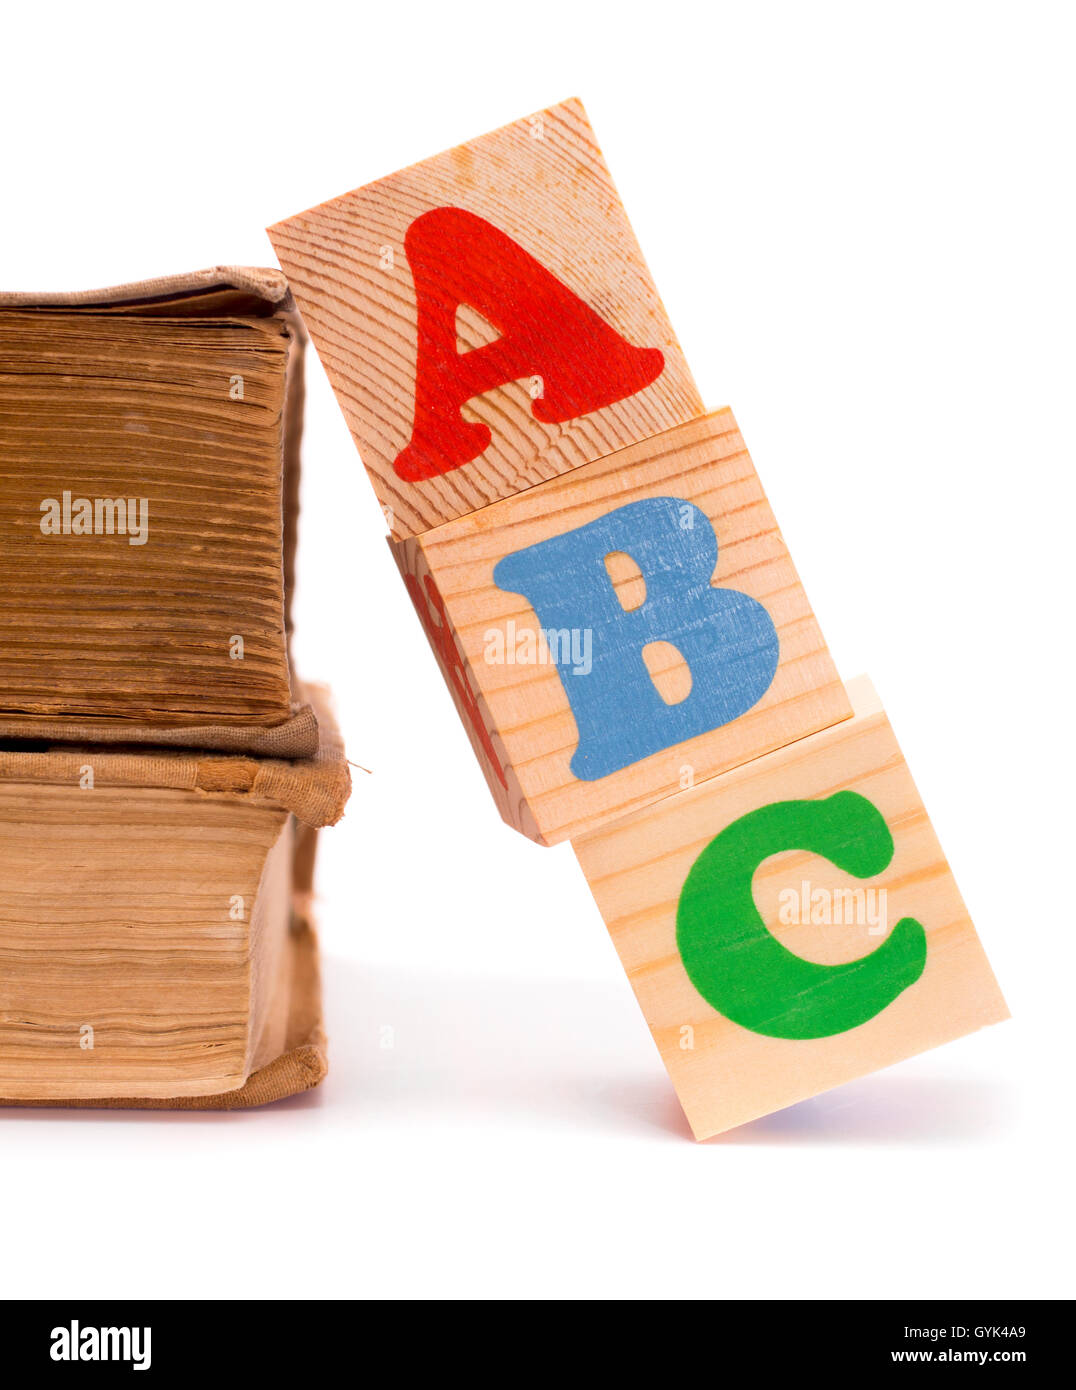 Alphabet letter ABC blocks for kids and old books Stock Photo